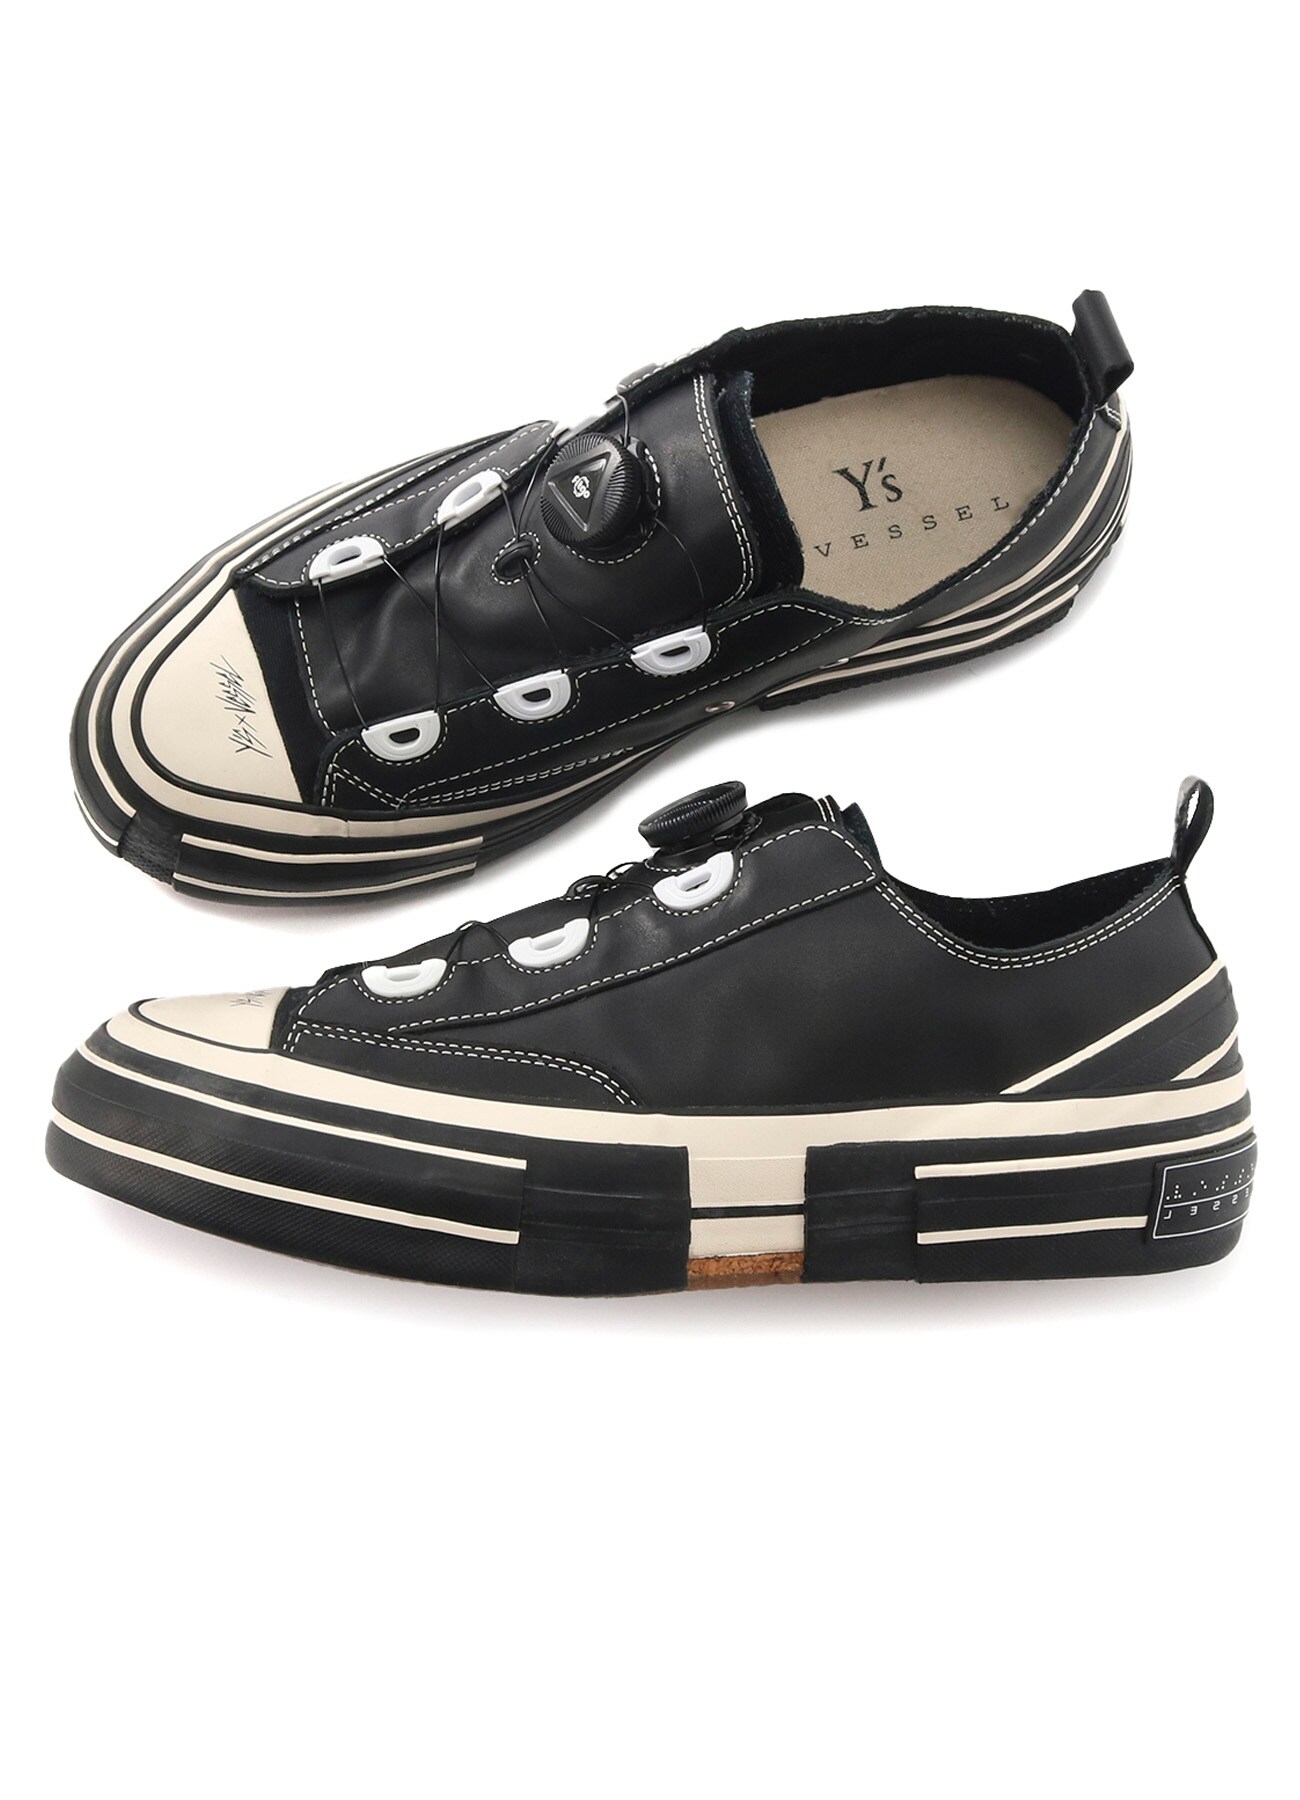 Y's x VESSEL SNEAKER MENS COLOR SMOOTH LEATHER